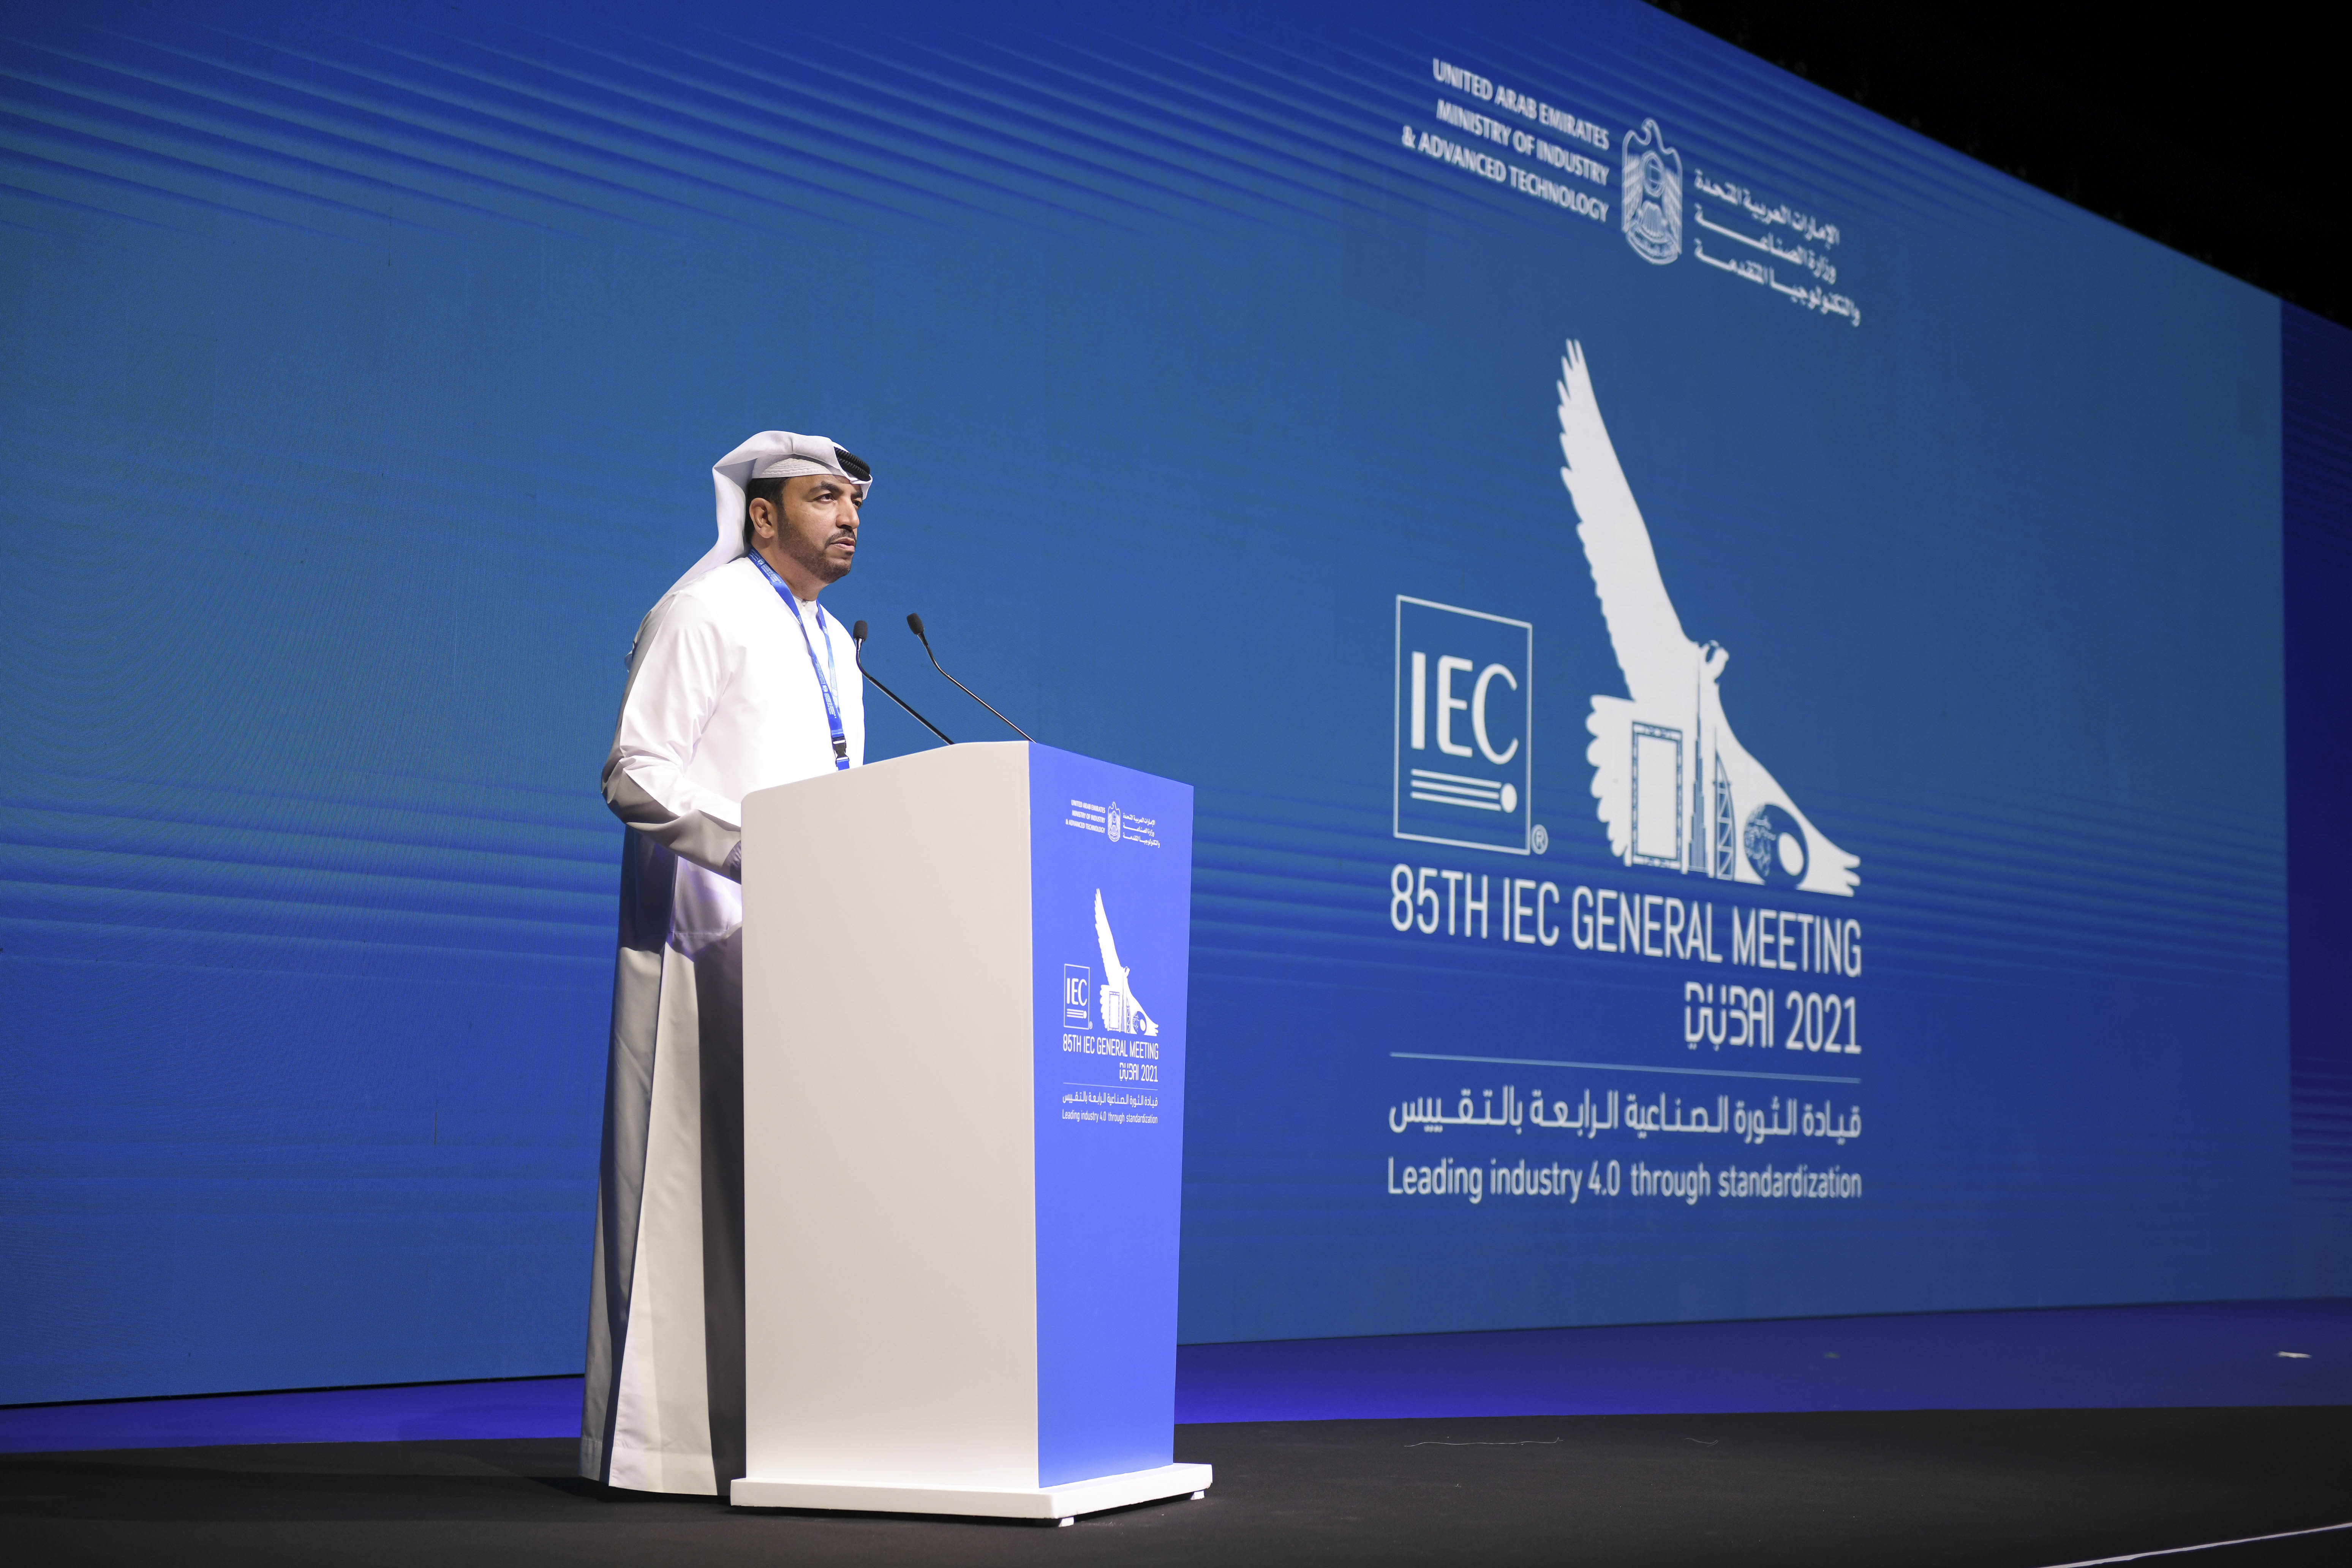 His Excellency Dr Sultan Ahmed Al Jaber, UAE Minister of Industry and Advanced Technology, opens the 85th IEC General Meeting in Dubai